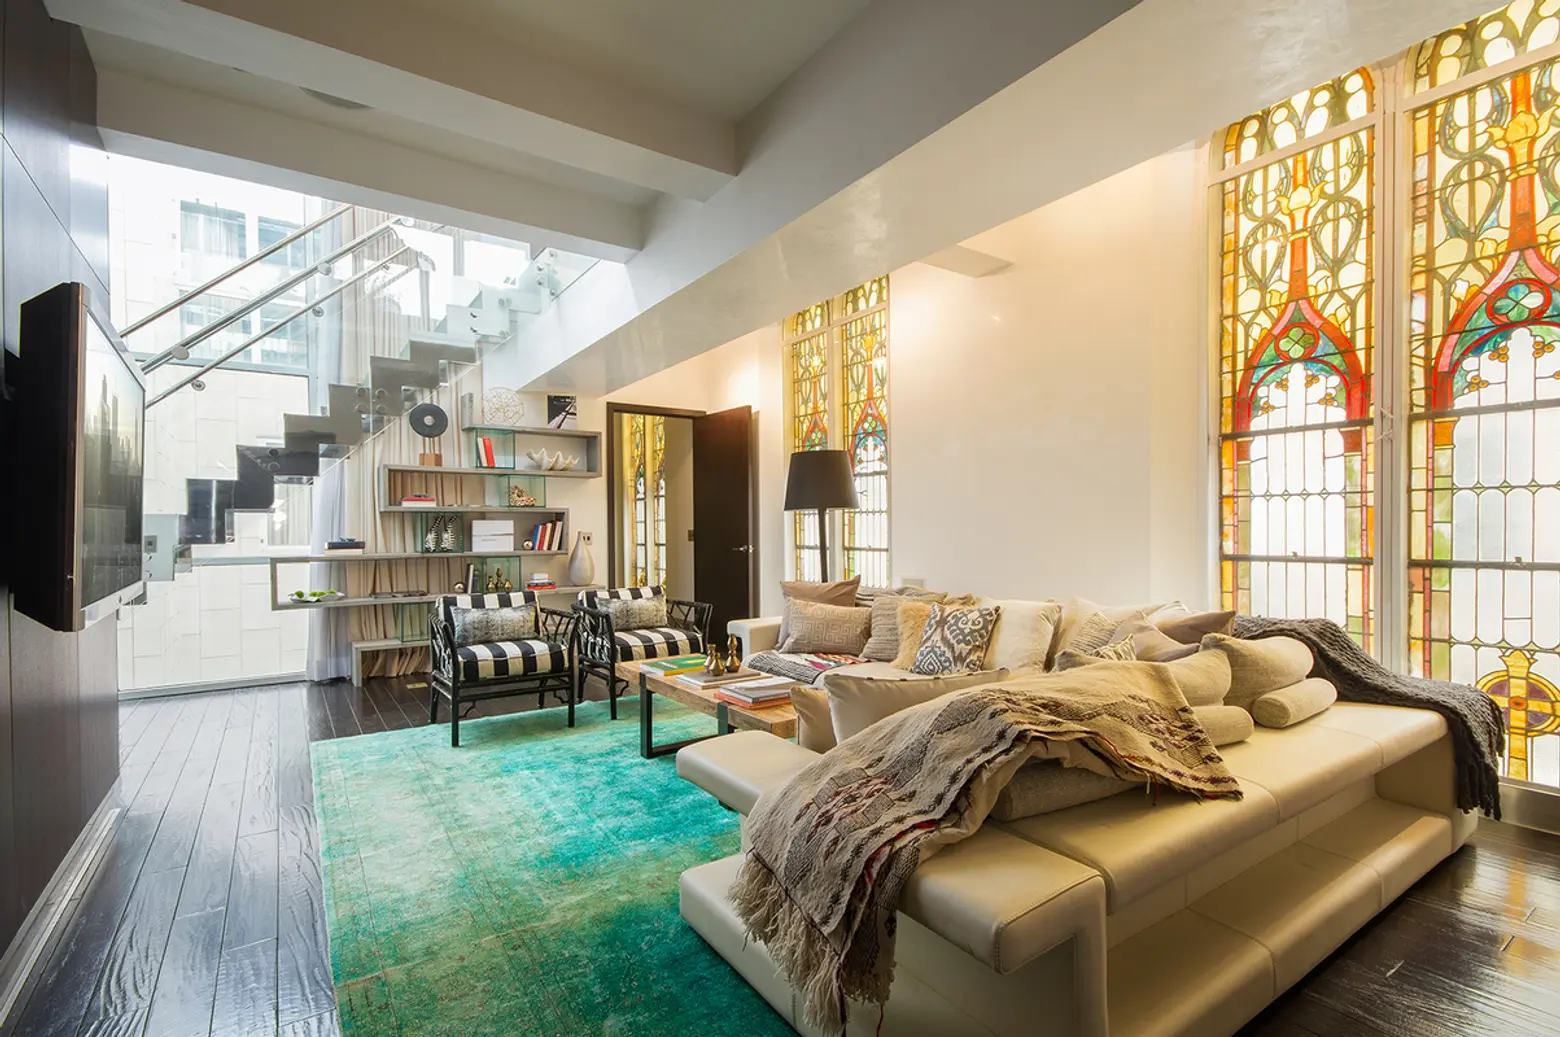 Jude Law’s Former Greenwich Village Penthouse in Gorgeous Church Conversion Asks $12.5M